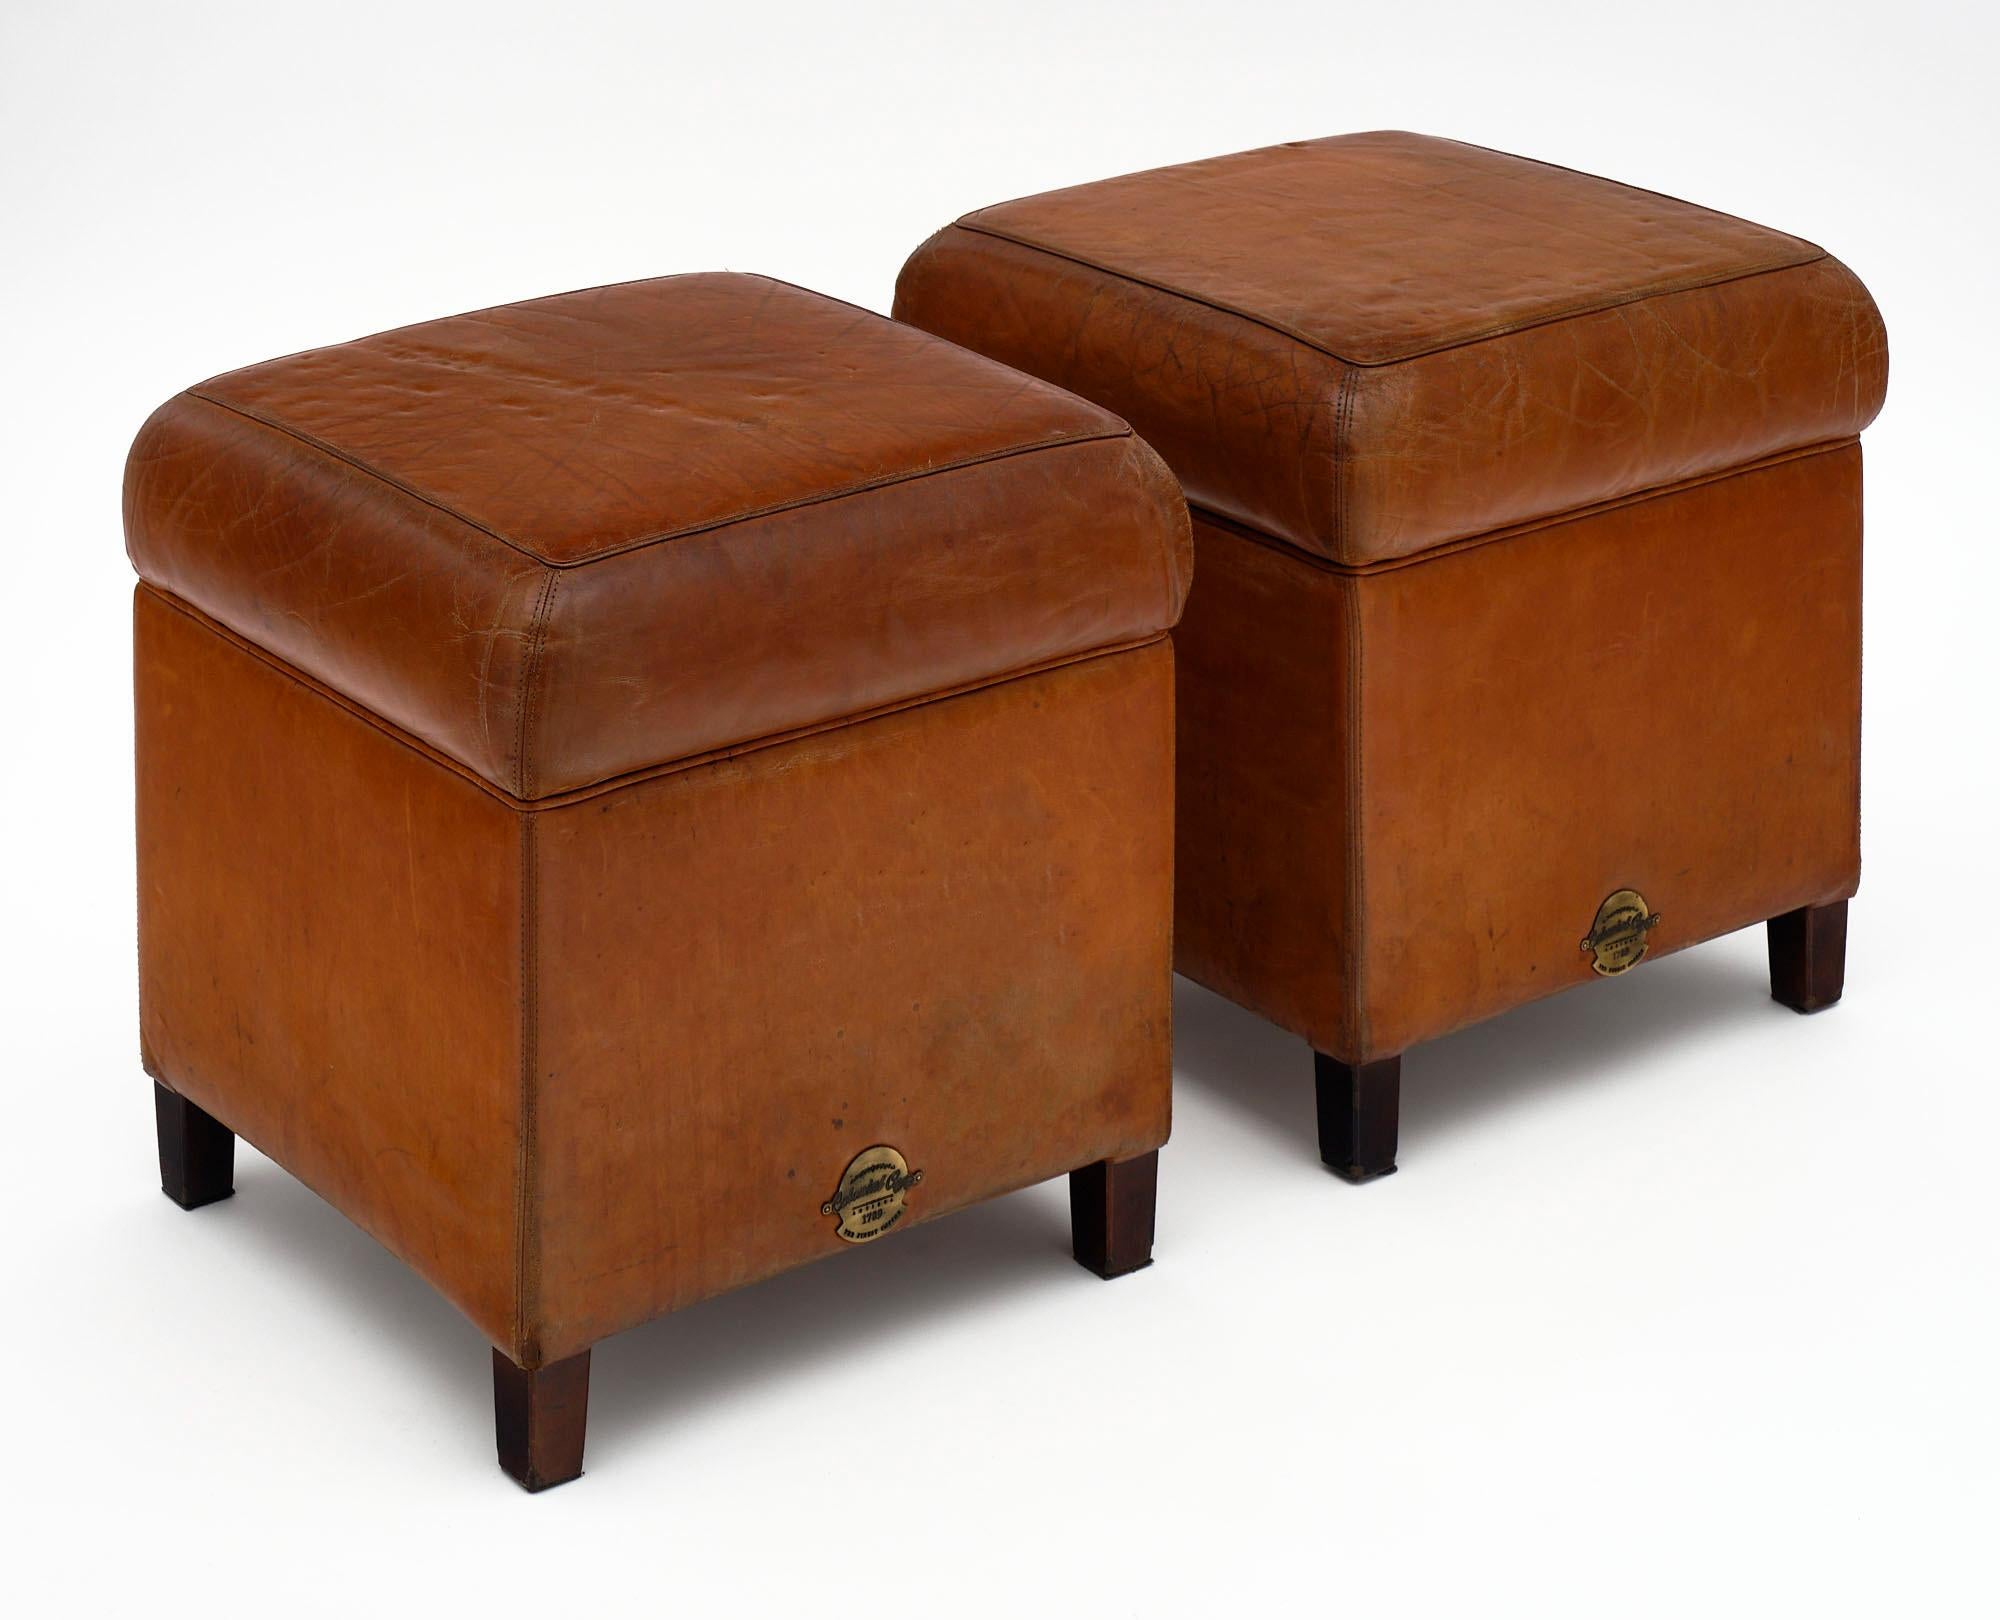 Pair of stools or ottomans made of patinated tan leather from iconic “Colonial Caffe 1789” in Milan, Italy.